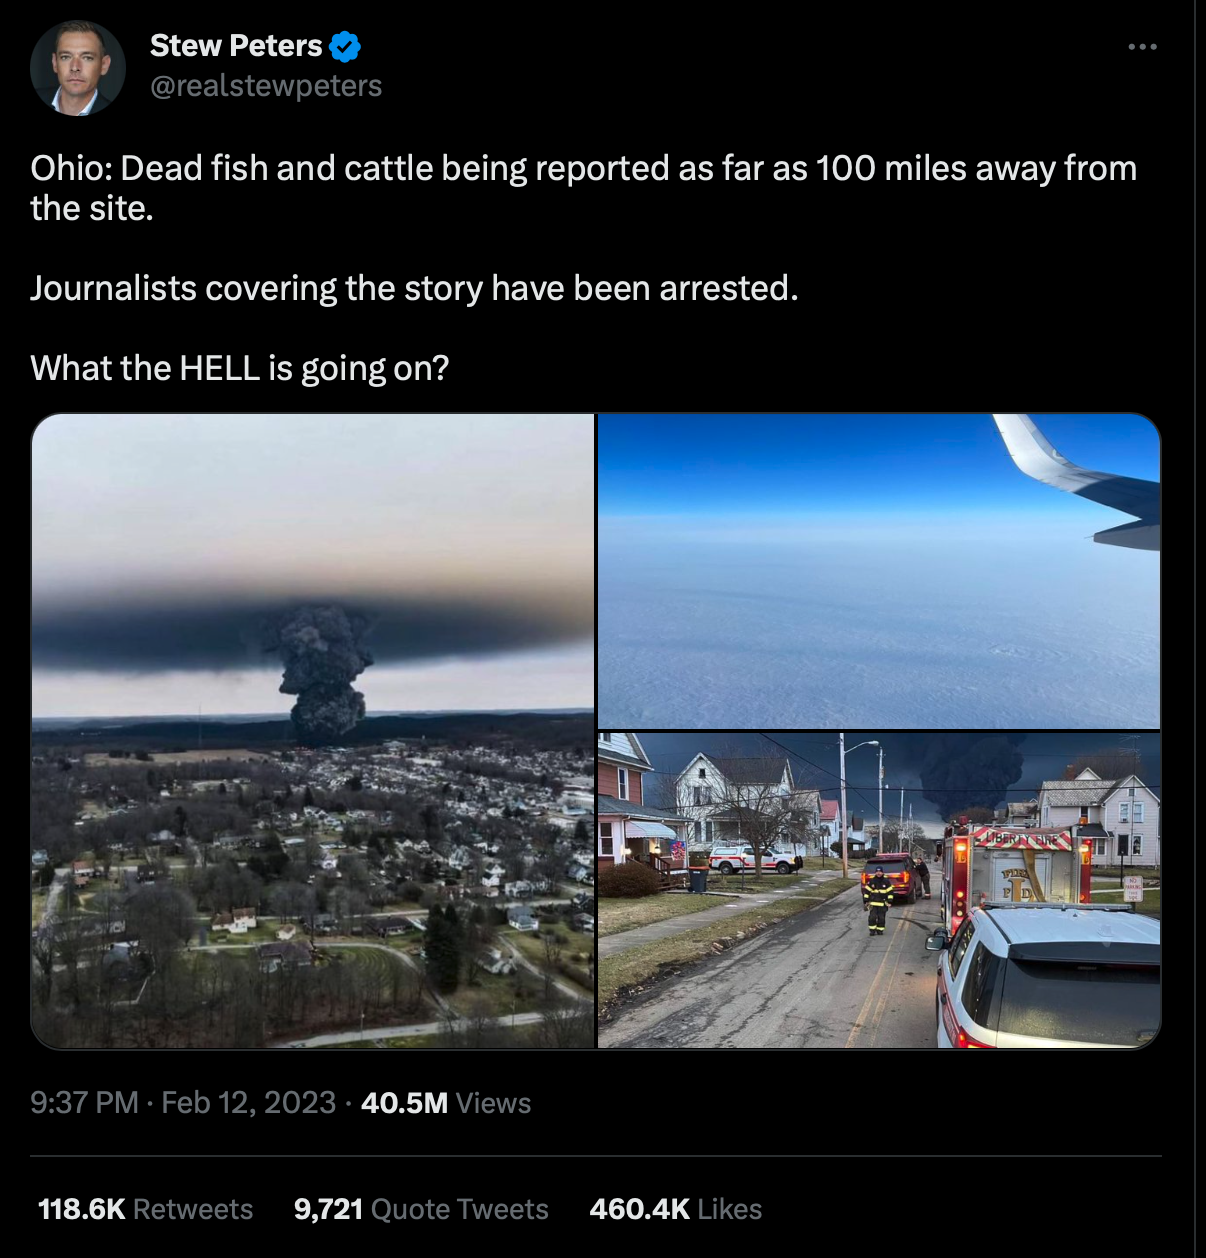 A tweet by Stew Peters went viral with almost half a million likes